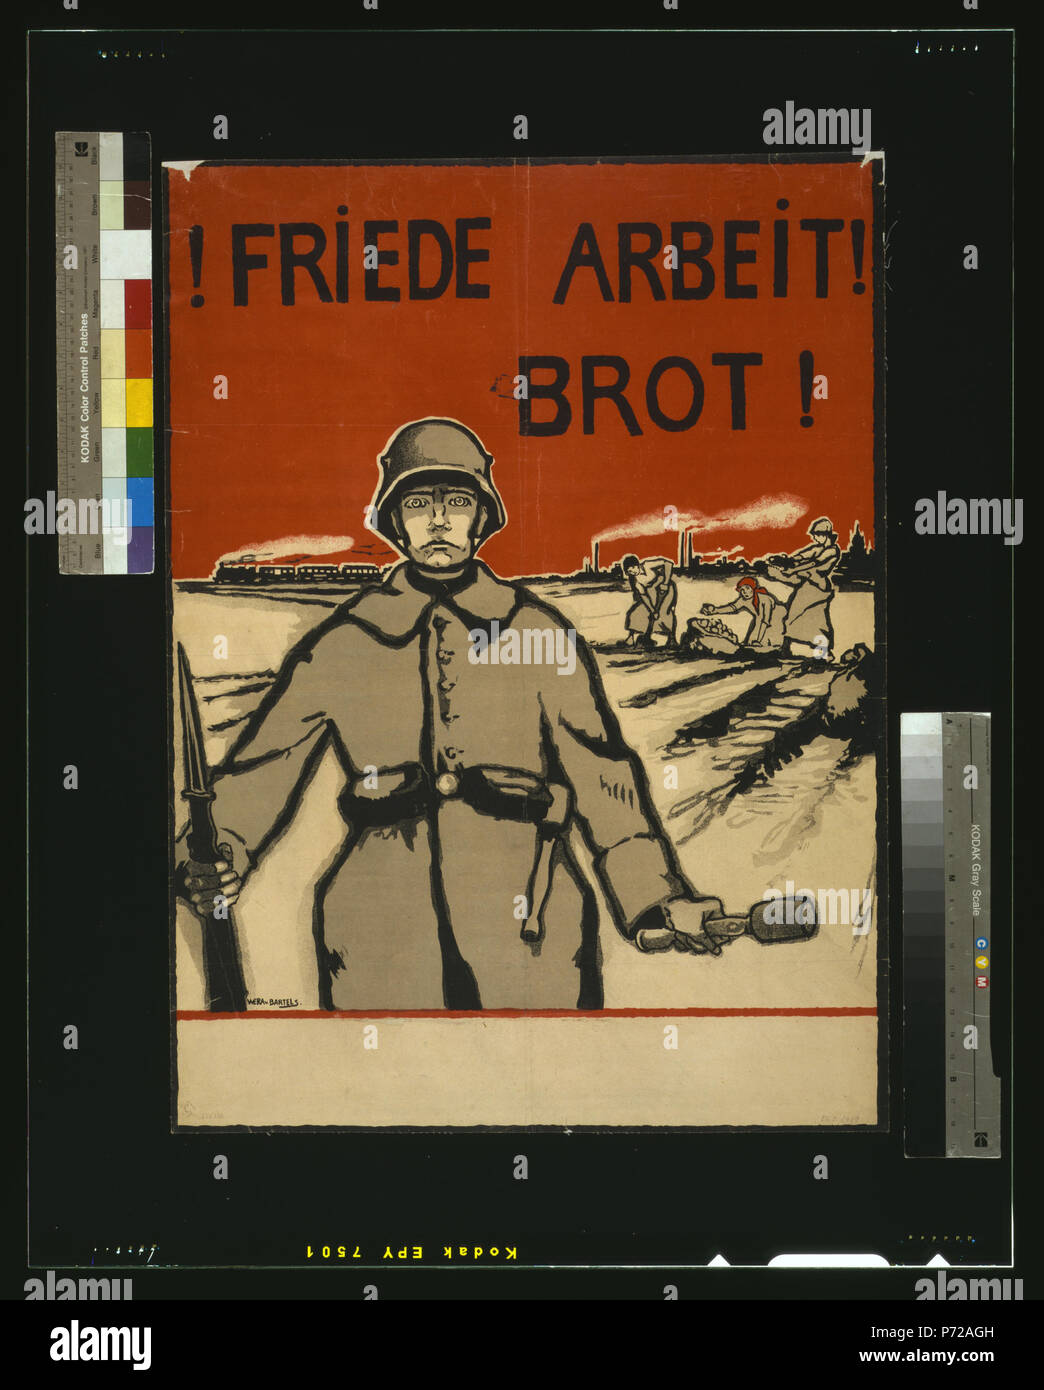 English: Title: Friede, Arbeit, Brot! Abstract: Poster showing a soldier holding a rifle and a grenade. In the background are women harvesting potatoes, a train, and factory smoke stacks. Text reads: Peace, work, bread! Physical description: 1 print (poster) : lithograph, color ; 78 x 57 cm. Notes: Forms part of: Rehse-Archiv für Zeitgeschichte und Publizistik.; Hand-written on verso: aus Sammlung A. Wolf, Leipzig 26 Mai 1919 Bahnhof Kirchenlaibach. Pencilled on lower right corner verso the artists name: Vera v. Bartels 26.5.1919 in Rehse's hand on front lower margin.; Wera v. Bartels.; Title  Stock Photo